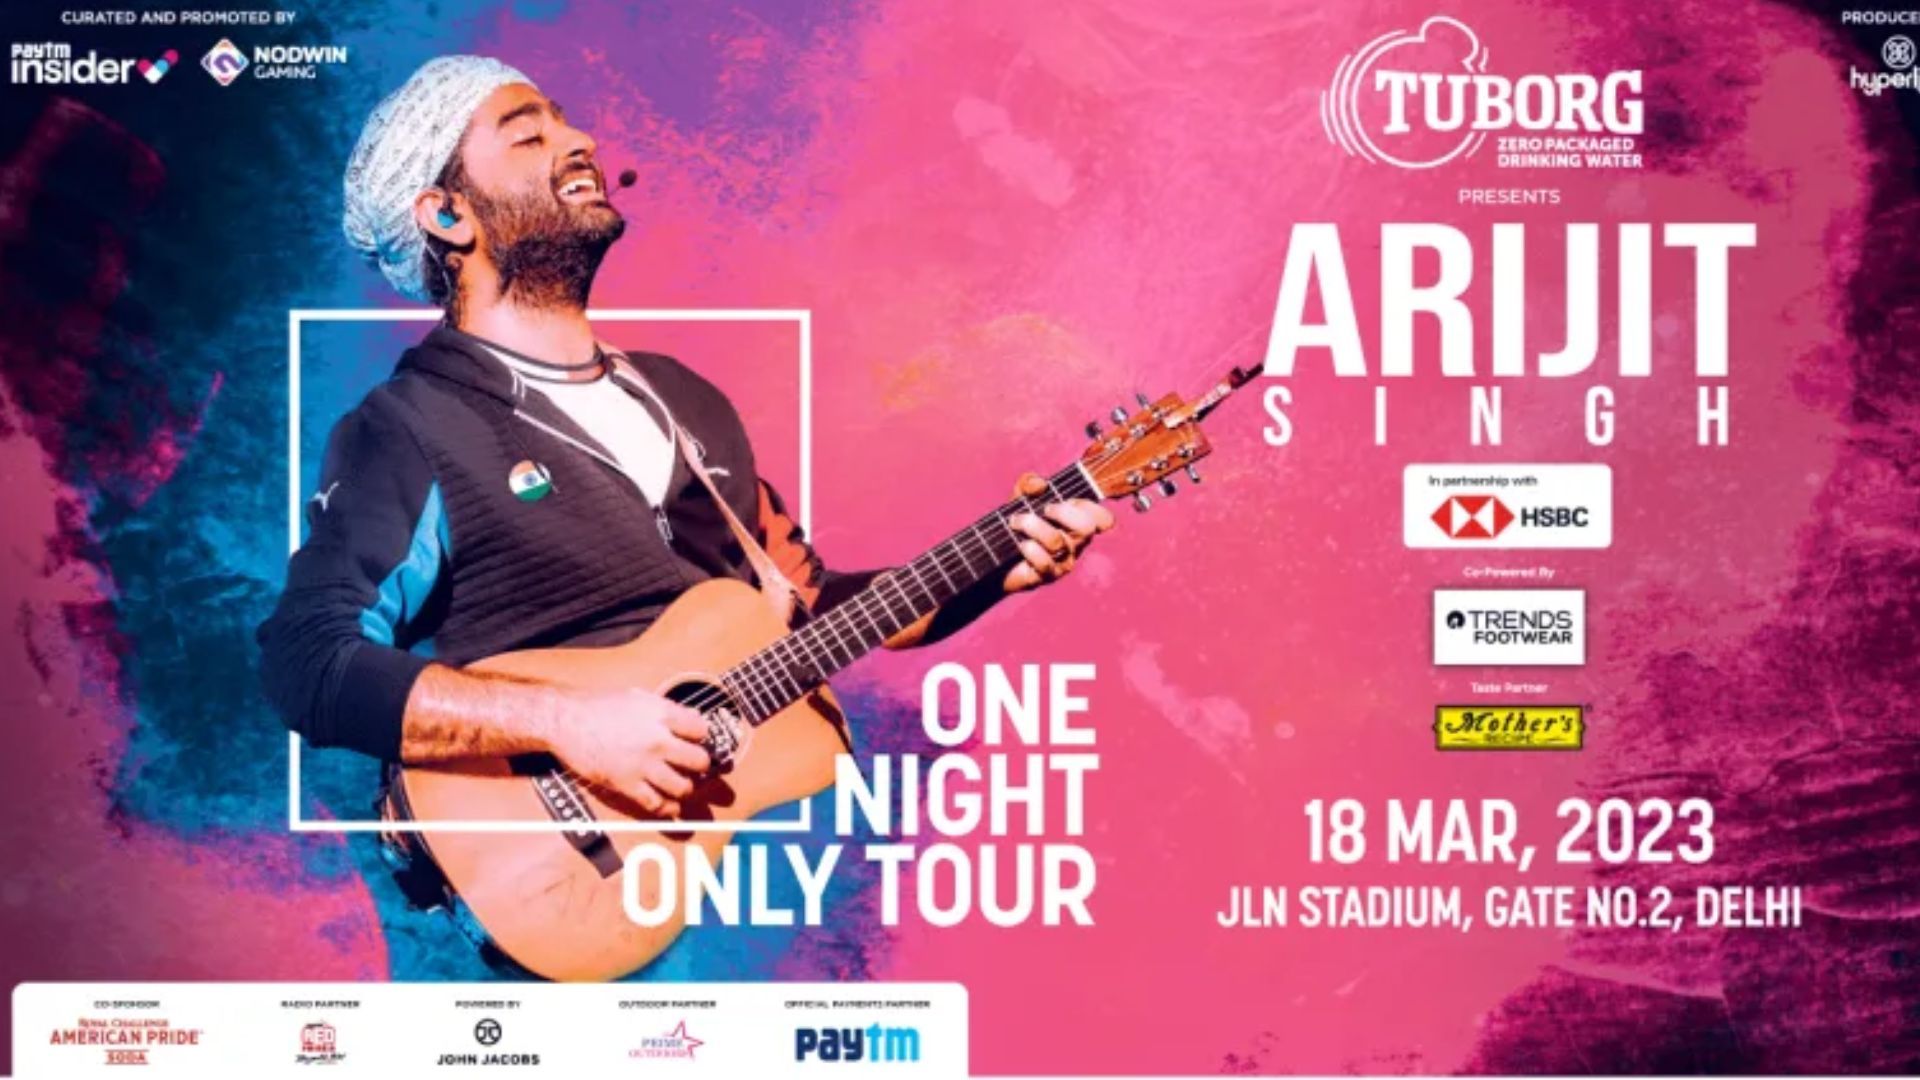 Everything You Need To Know About Arijit Singh's Delhi Concert In 2023